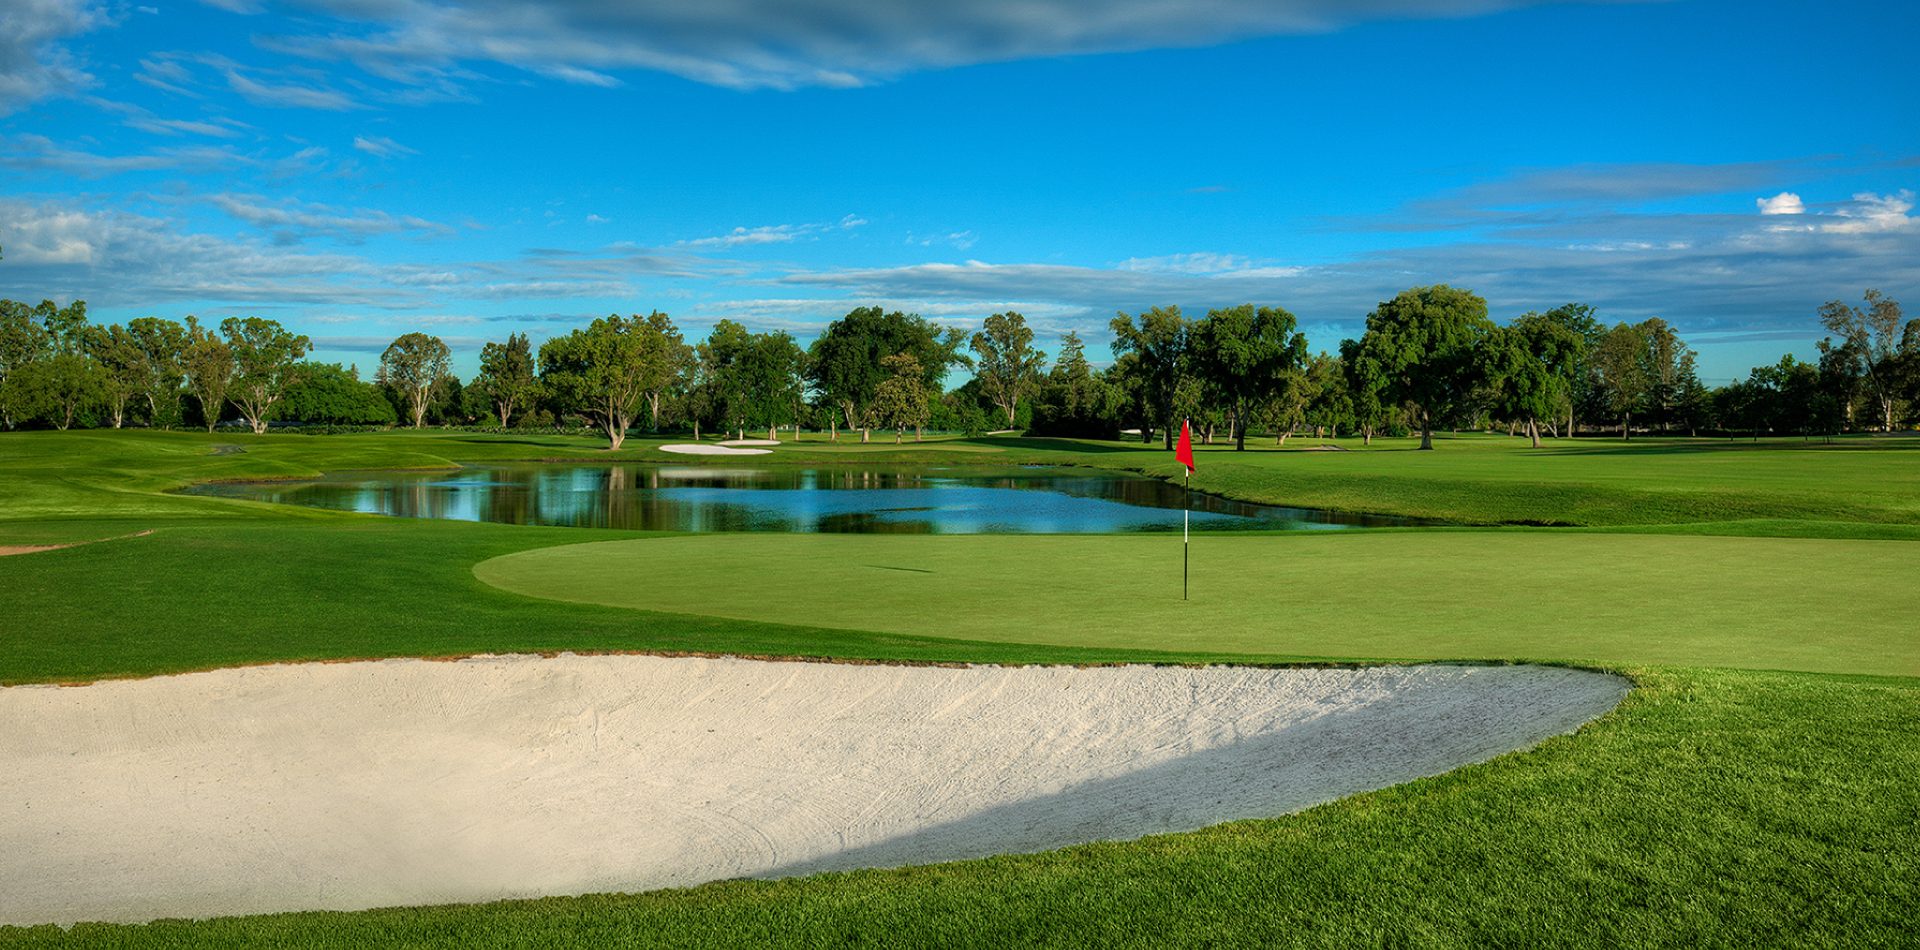 Golf Course located in the greater Sacramento area